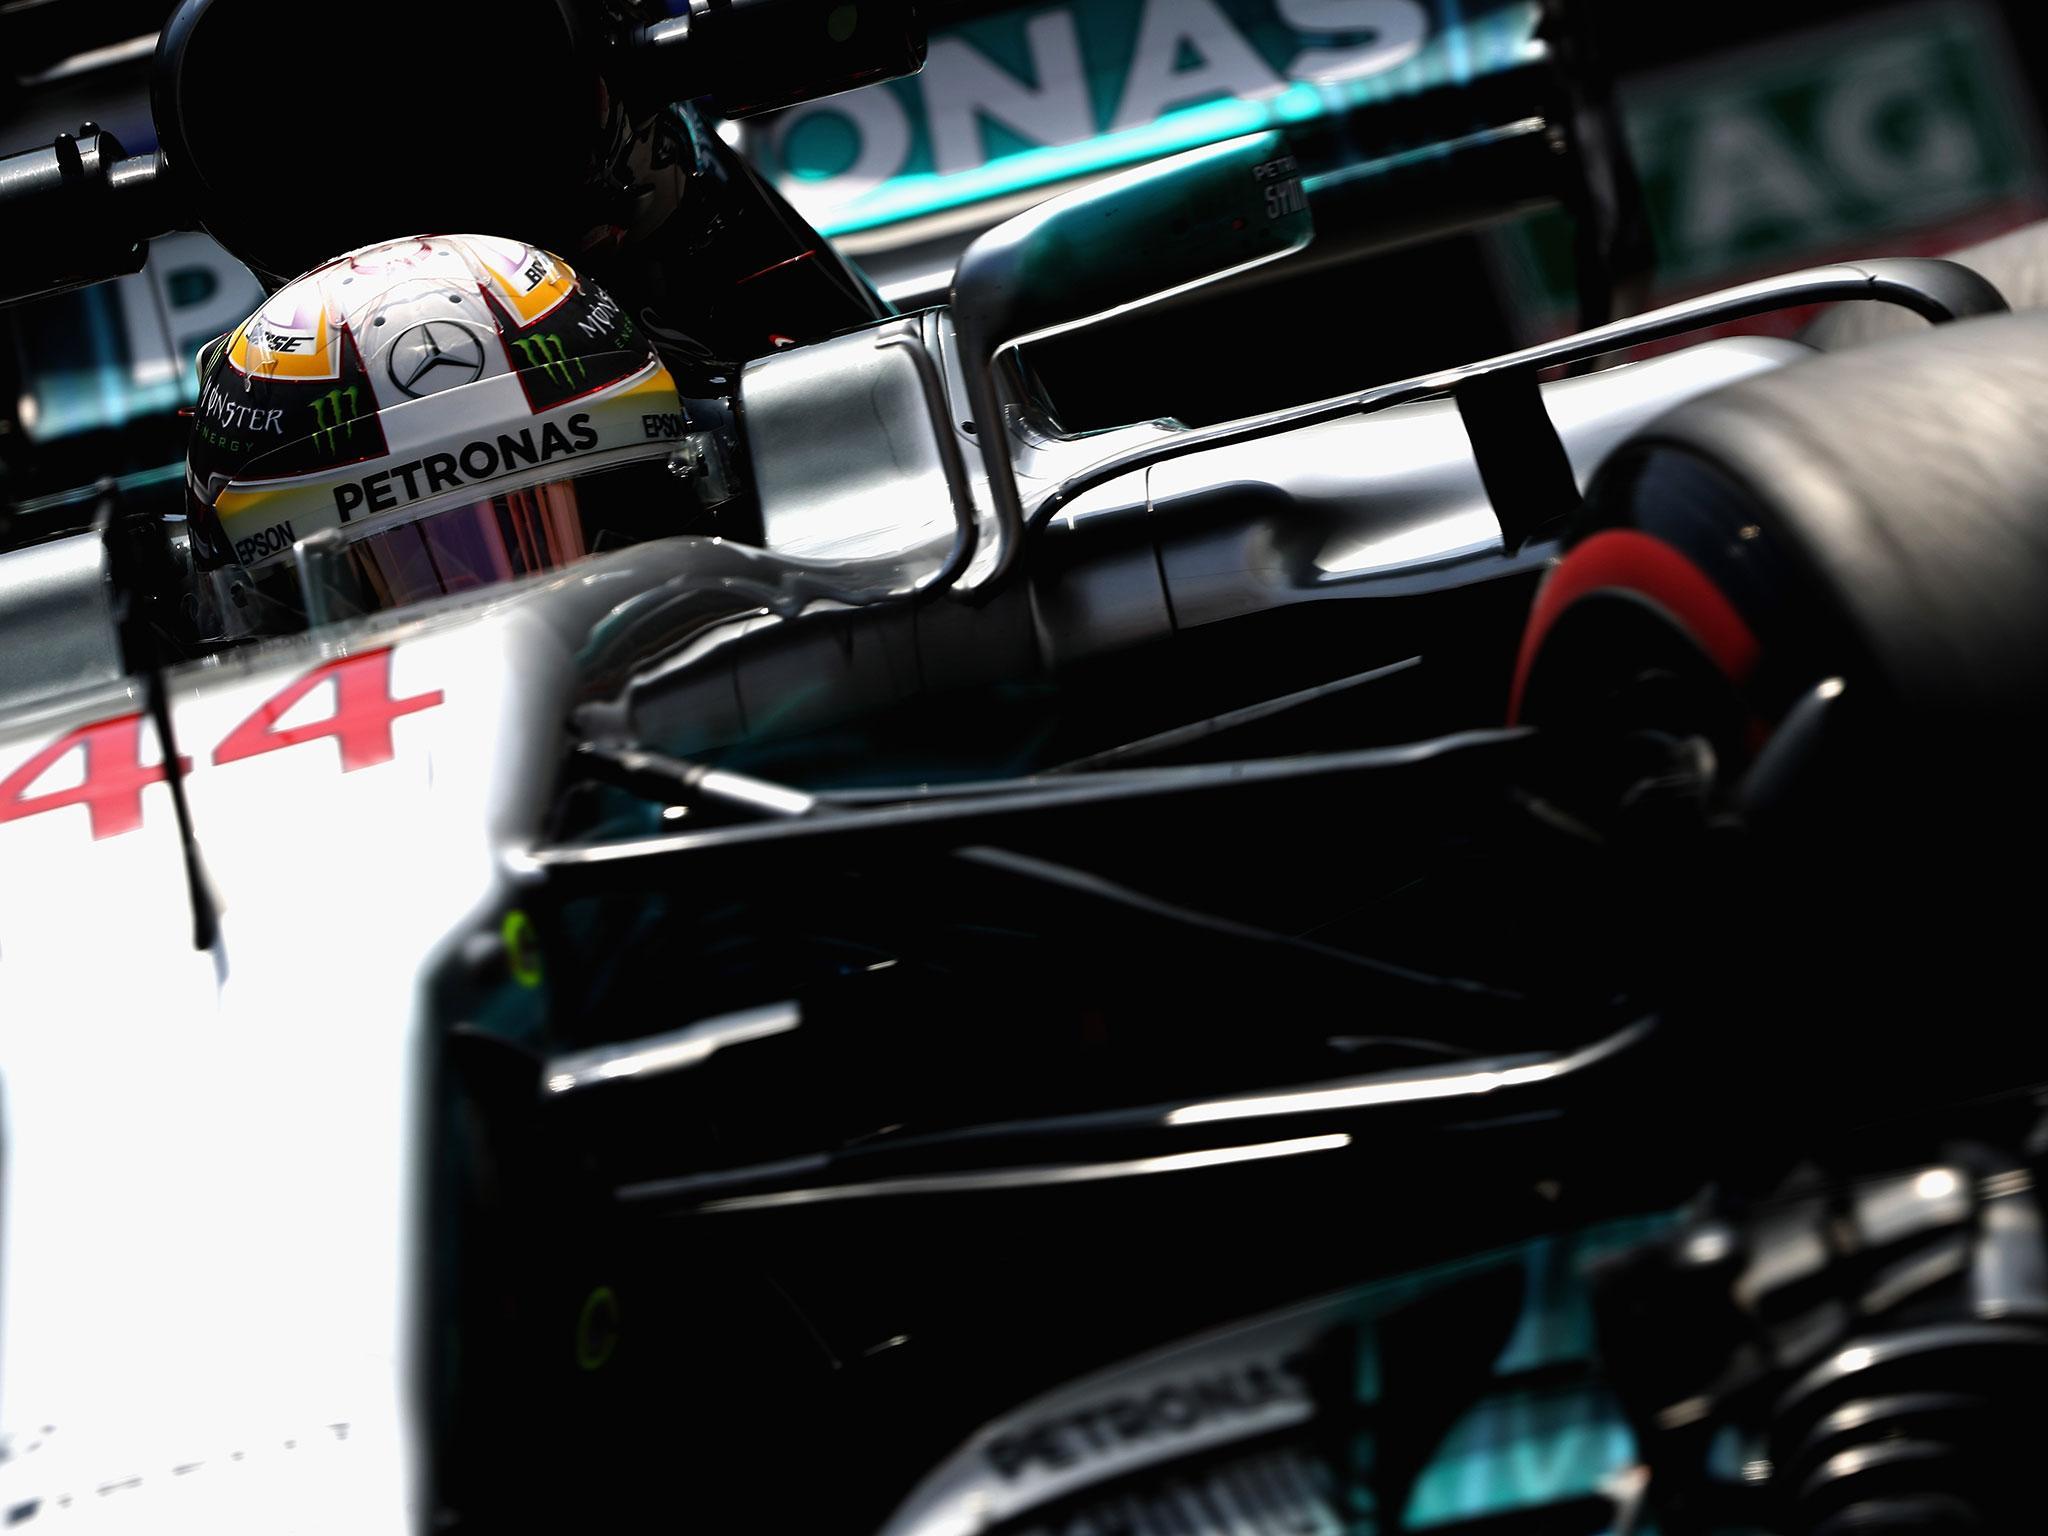 Lewis Hamilton couldn't keep up with the pace of Sebastian Vettel's Ferrari